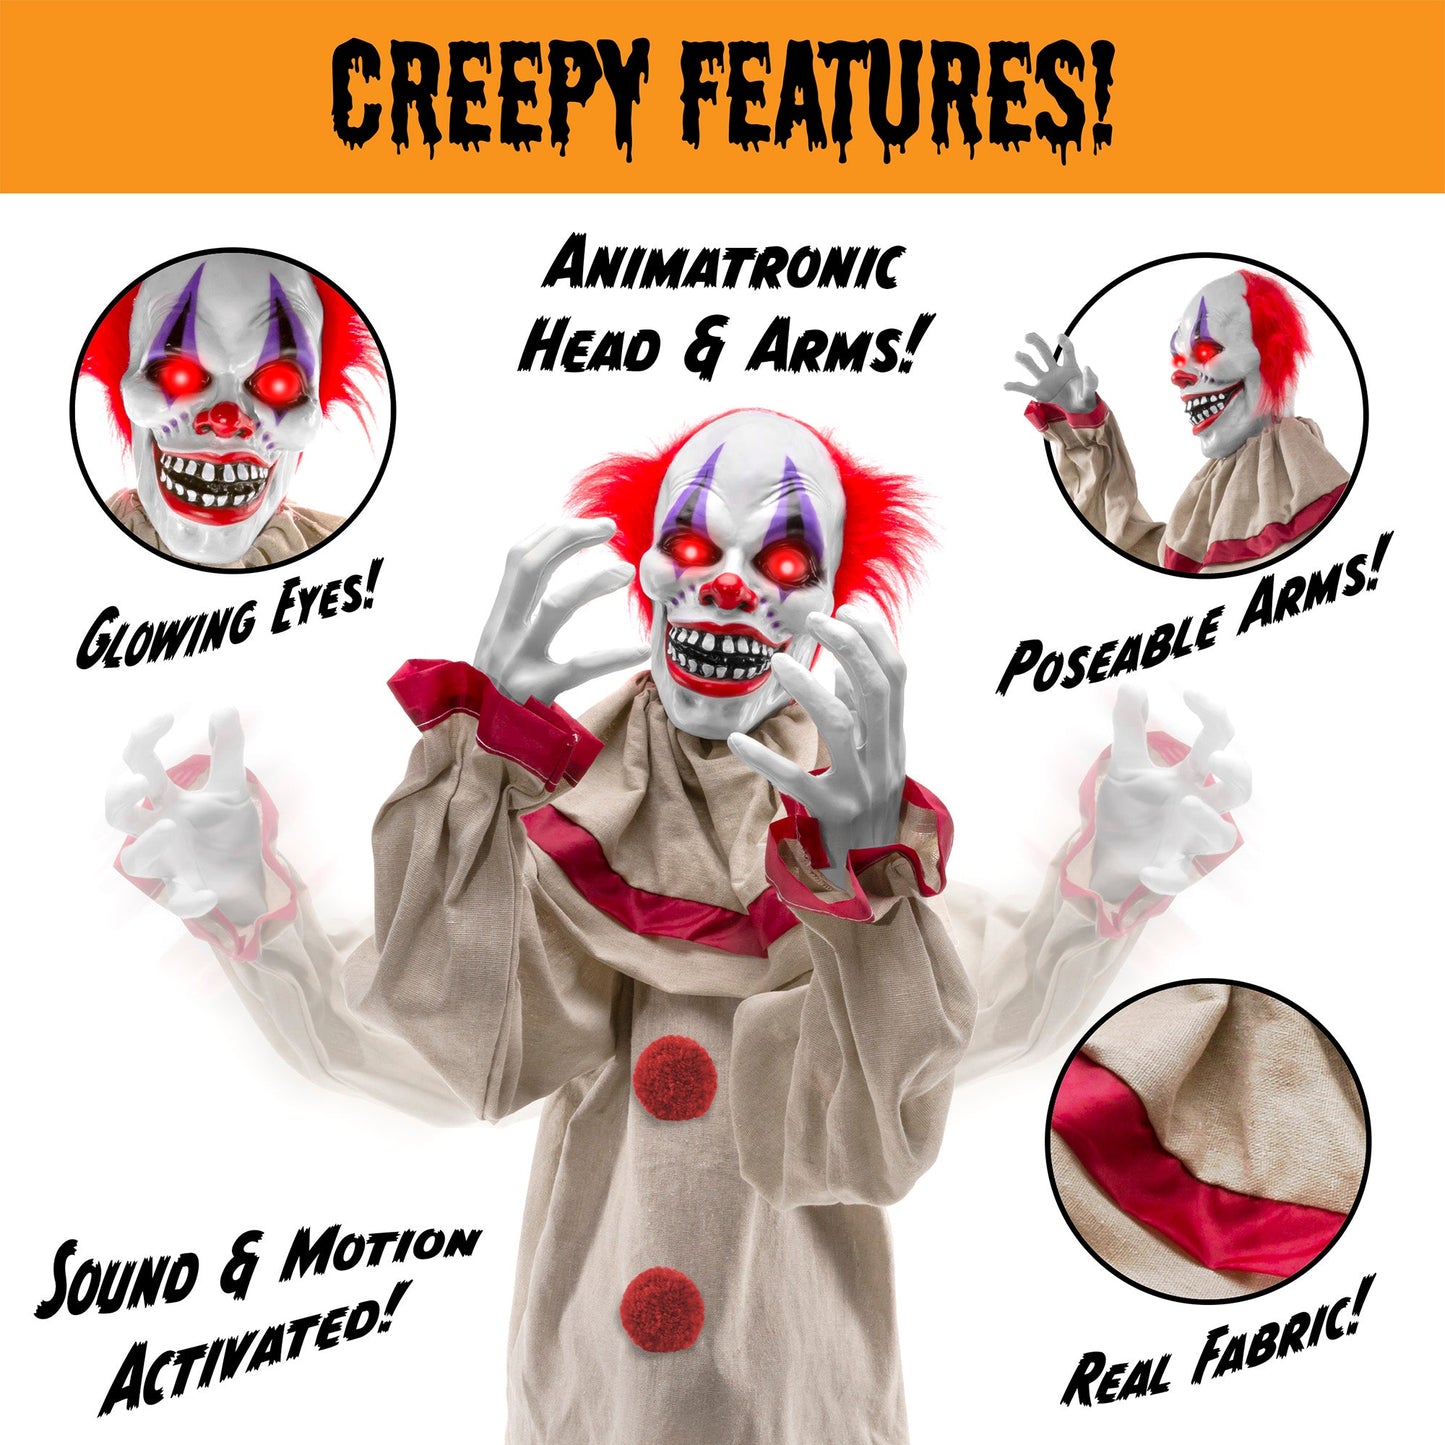 Scary Harry the Motion Activated Animatronic Killer Clown Halloween Prop